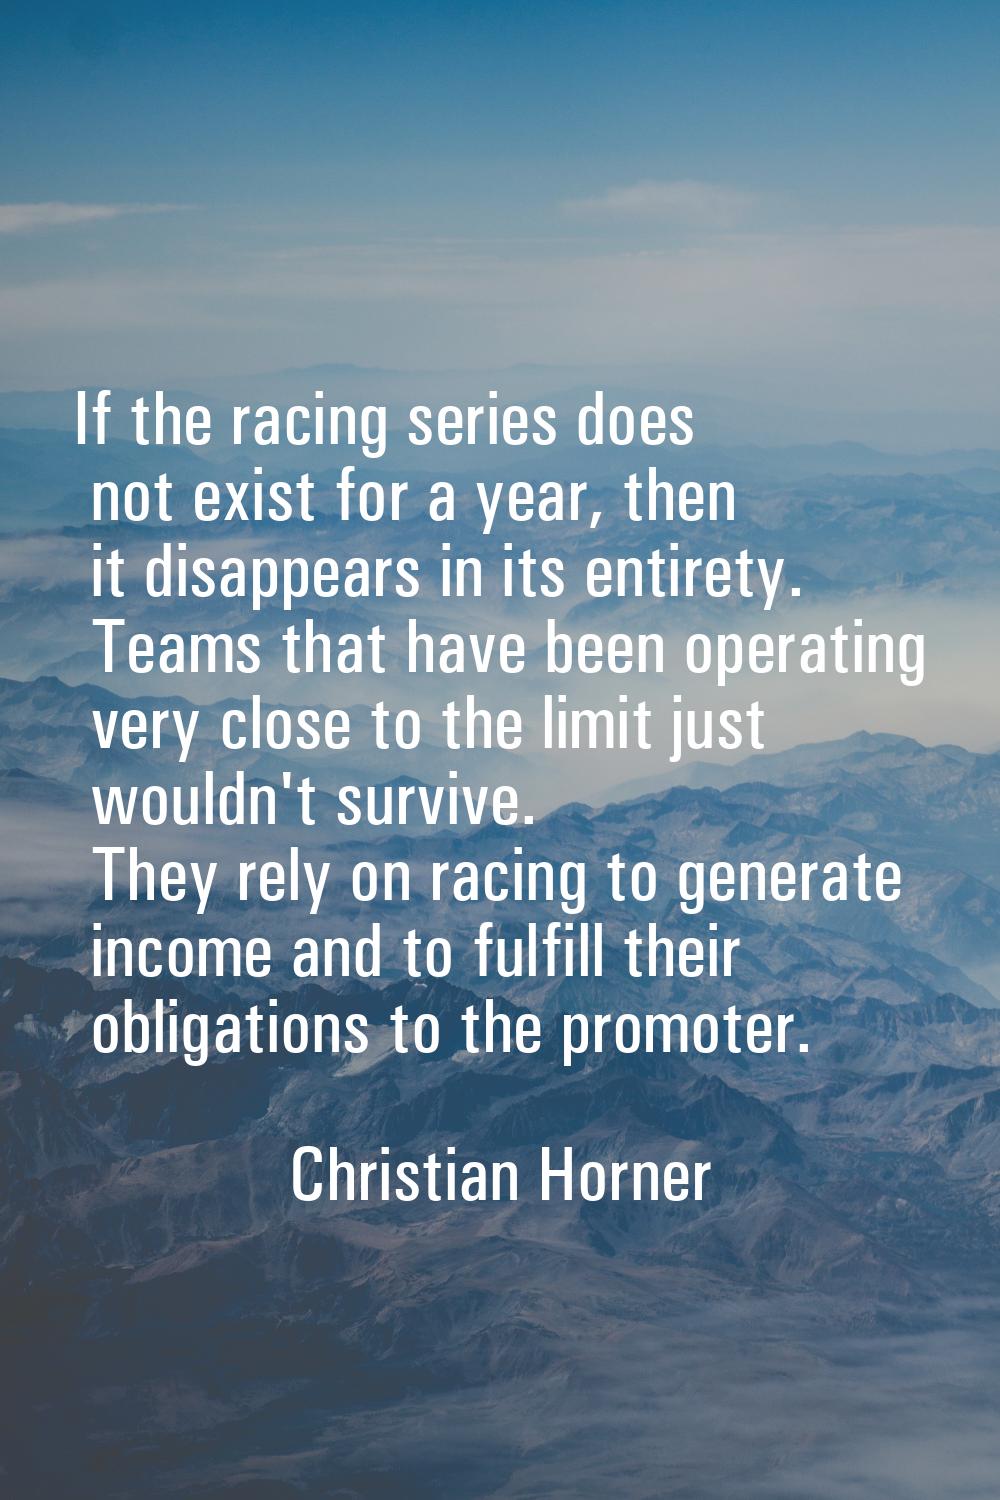 If the racing series does not exist for a year, then it disappears in its entirety. Teams that have